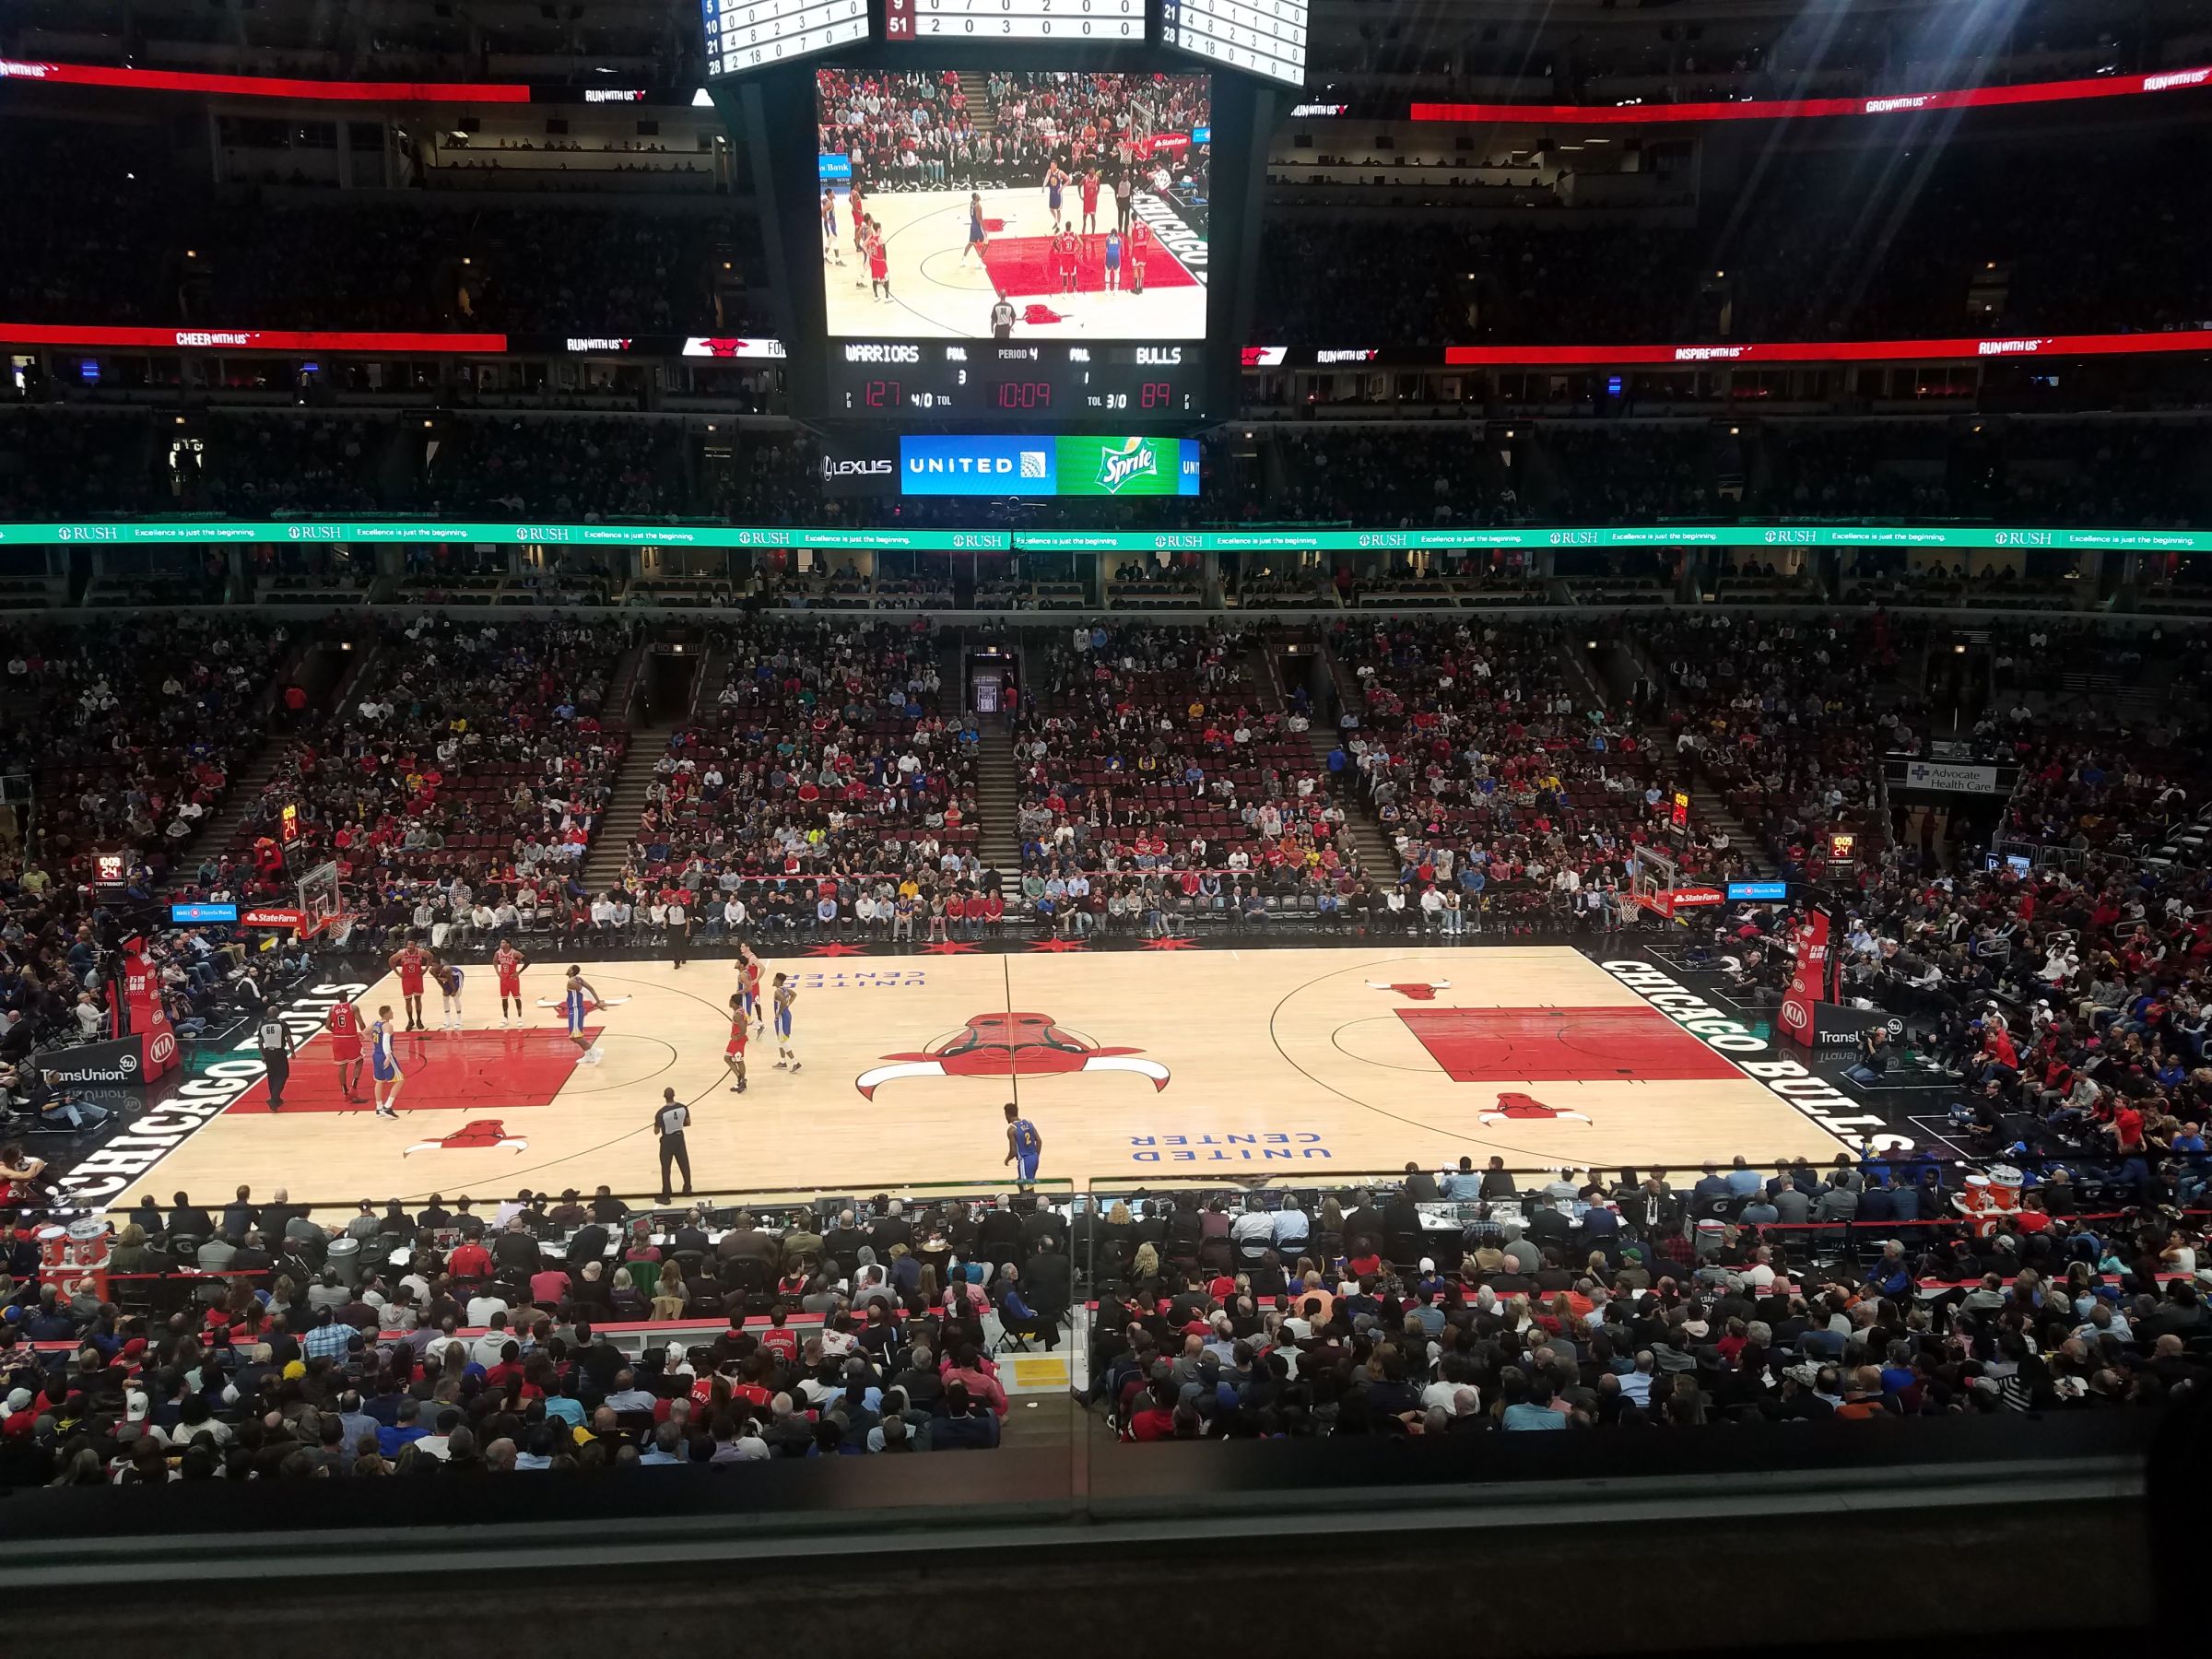 Section 234 at United Center - Chicago Bulls - RateYourSeats.com